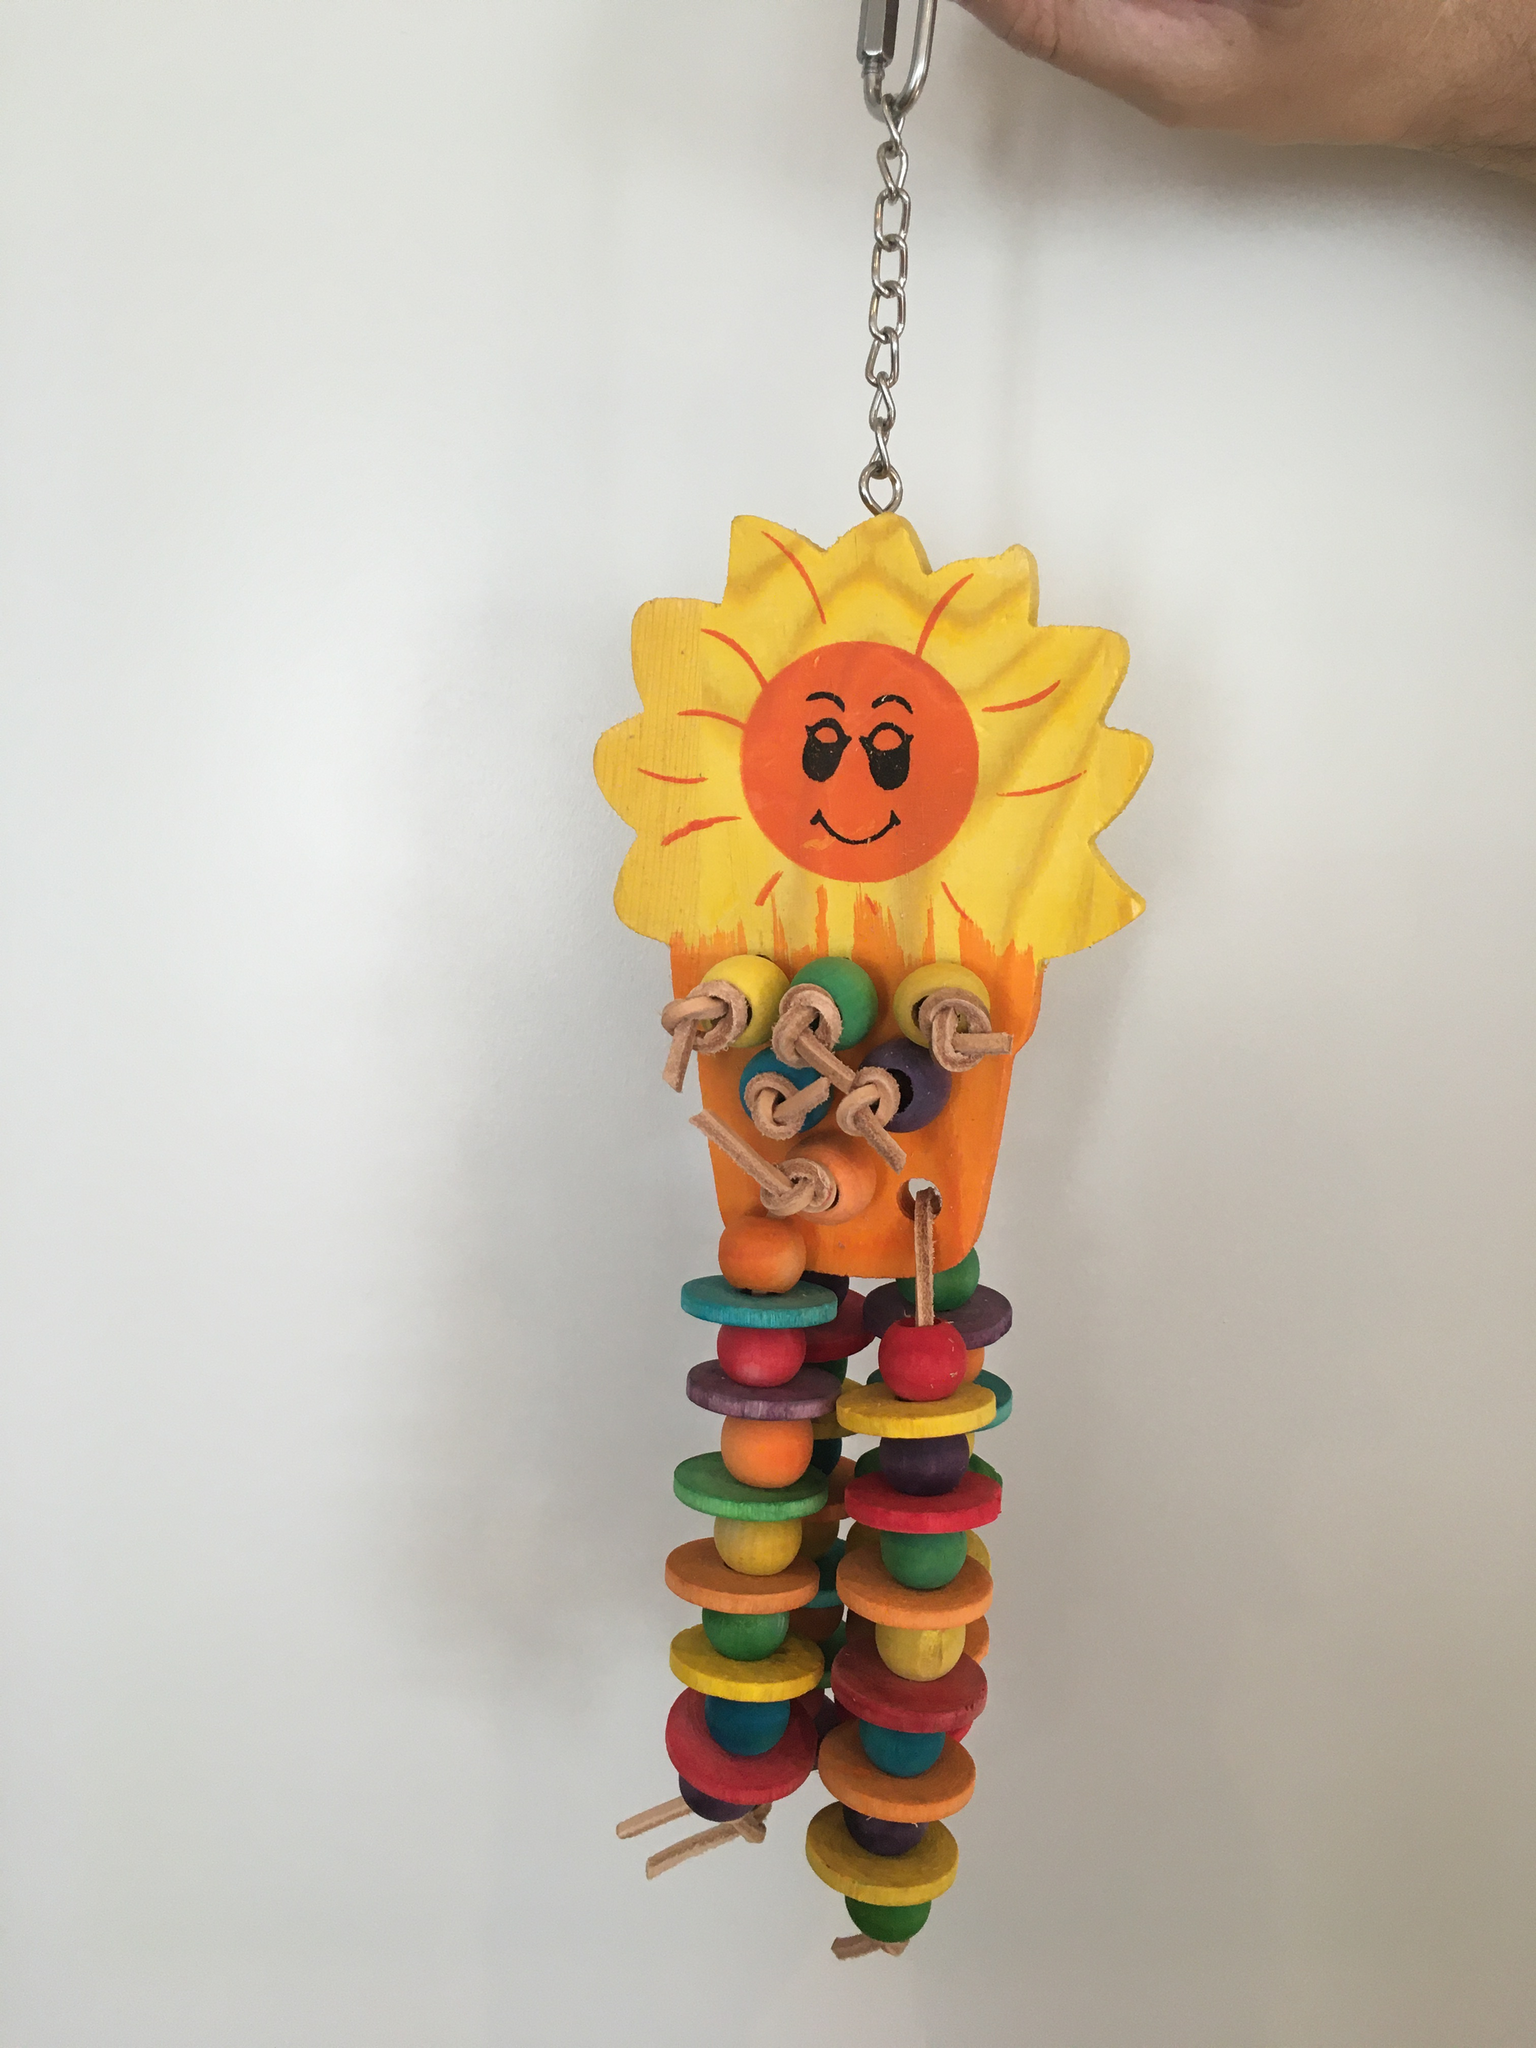 sunflower toy for parrots, bright yellow with rainbow dangles